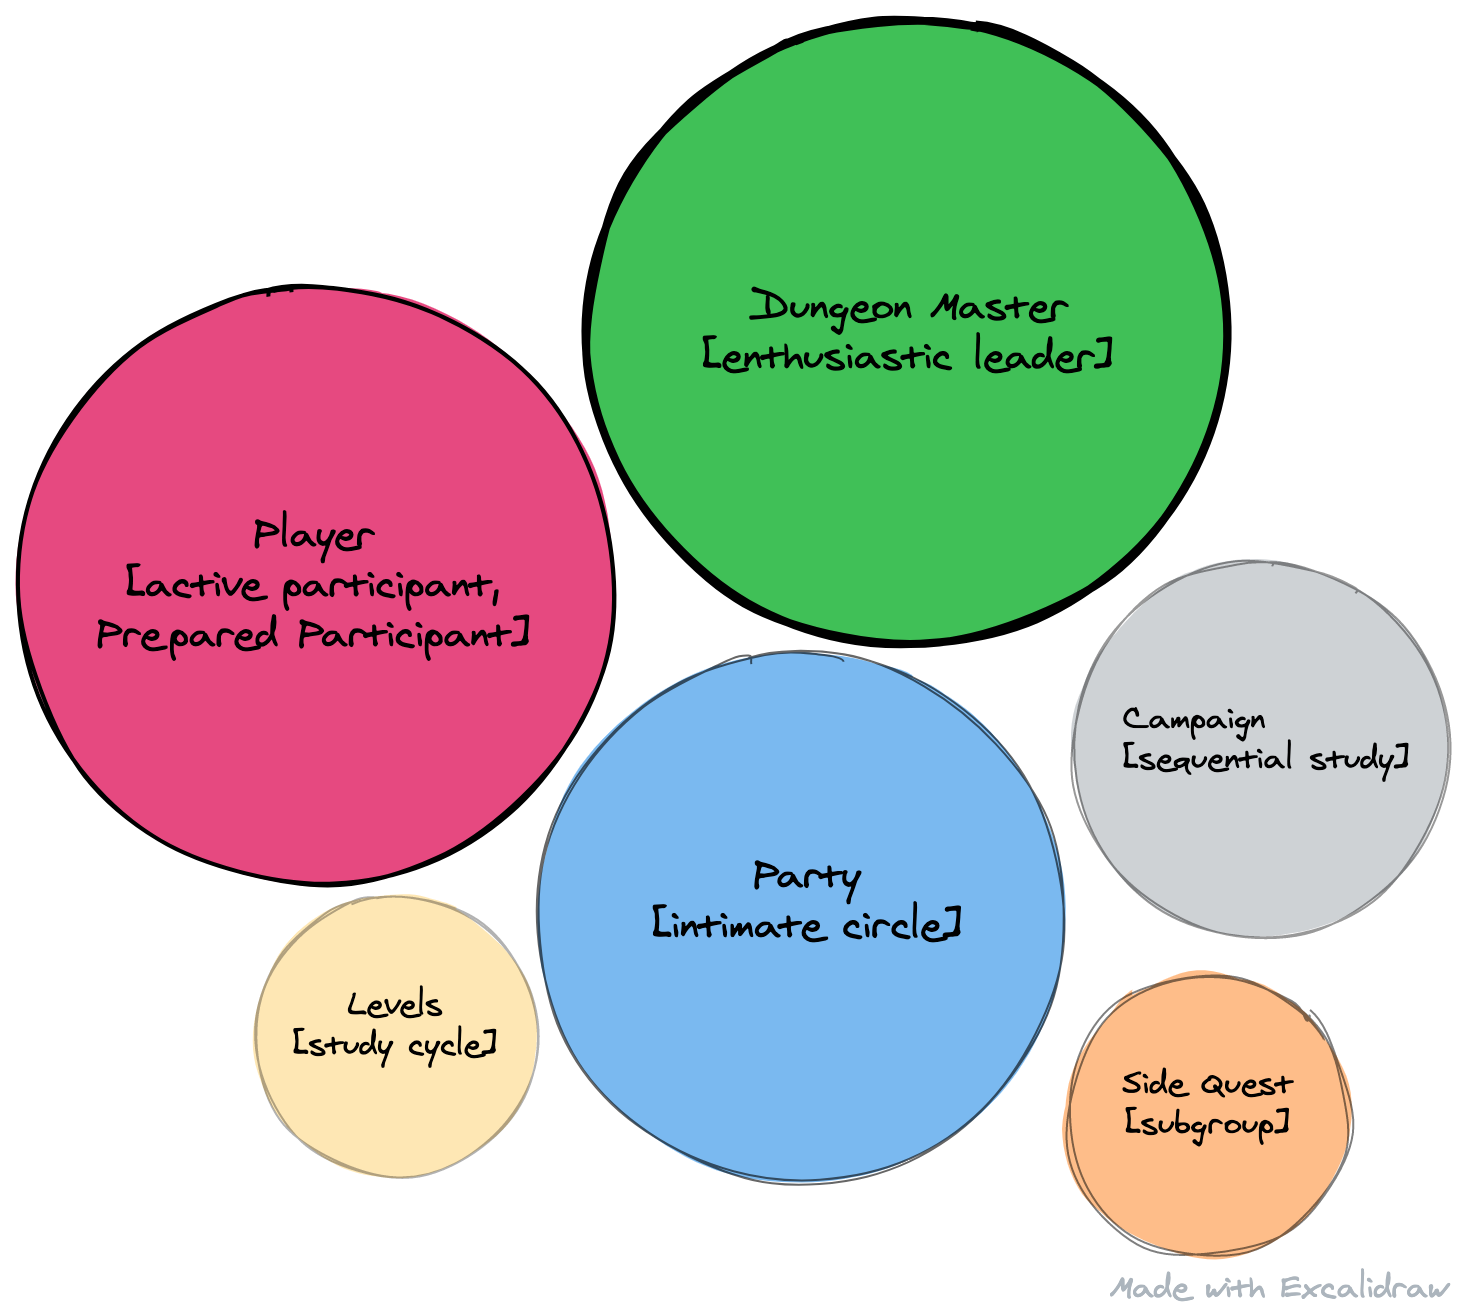 Diagram of Knowledge Adventure Clubs and how book clubs are similar to dungeons and dragons